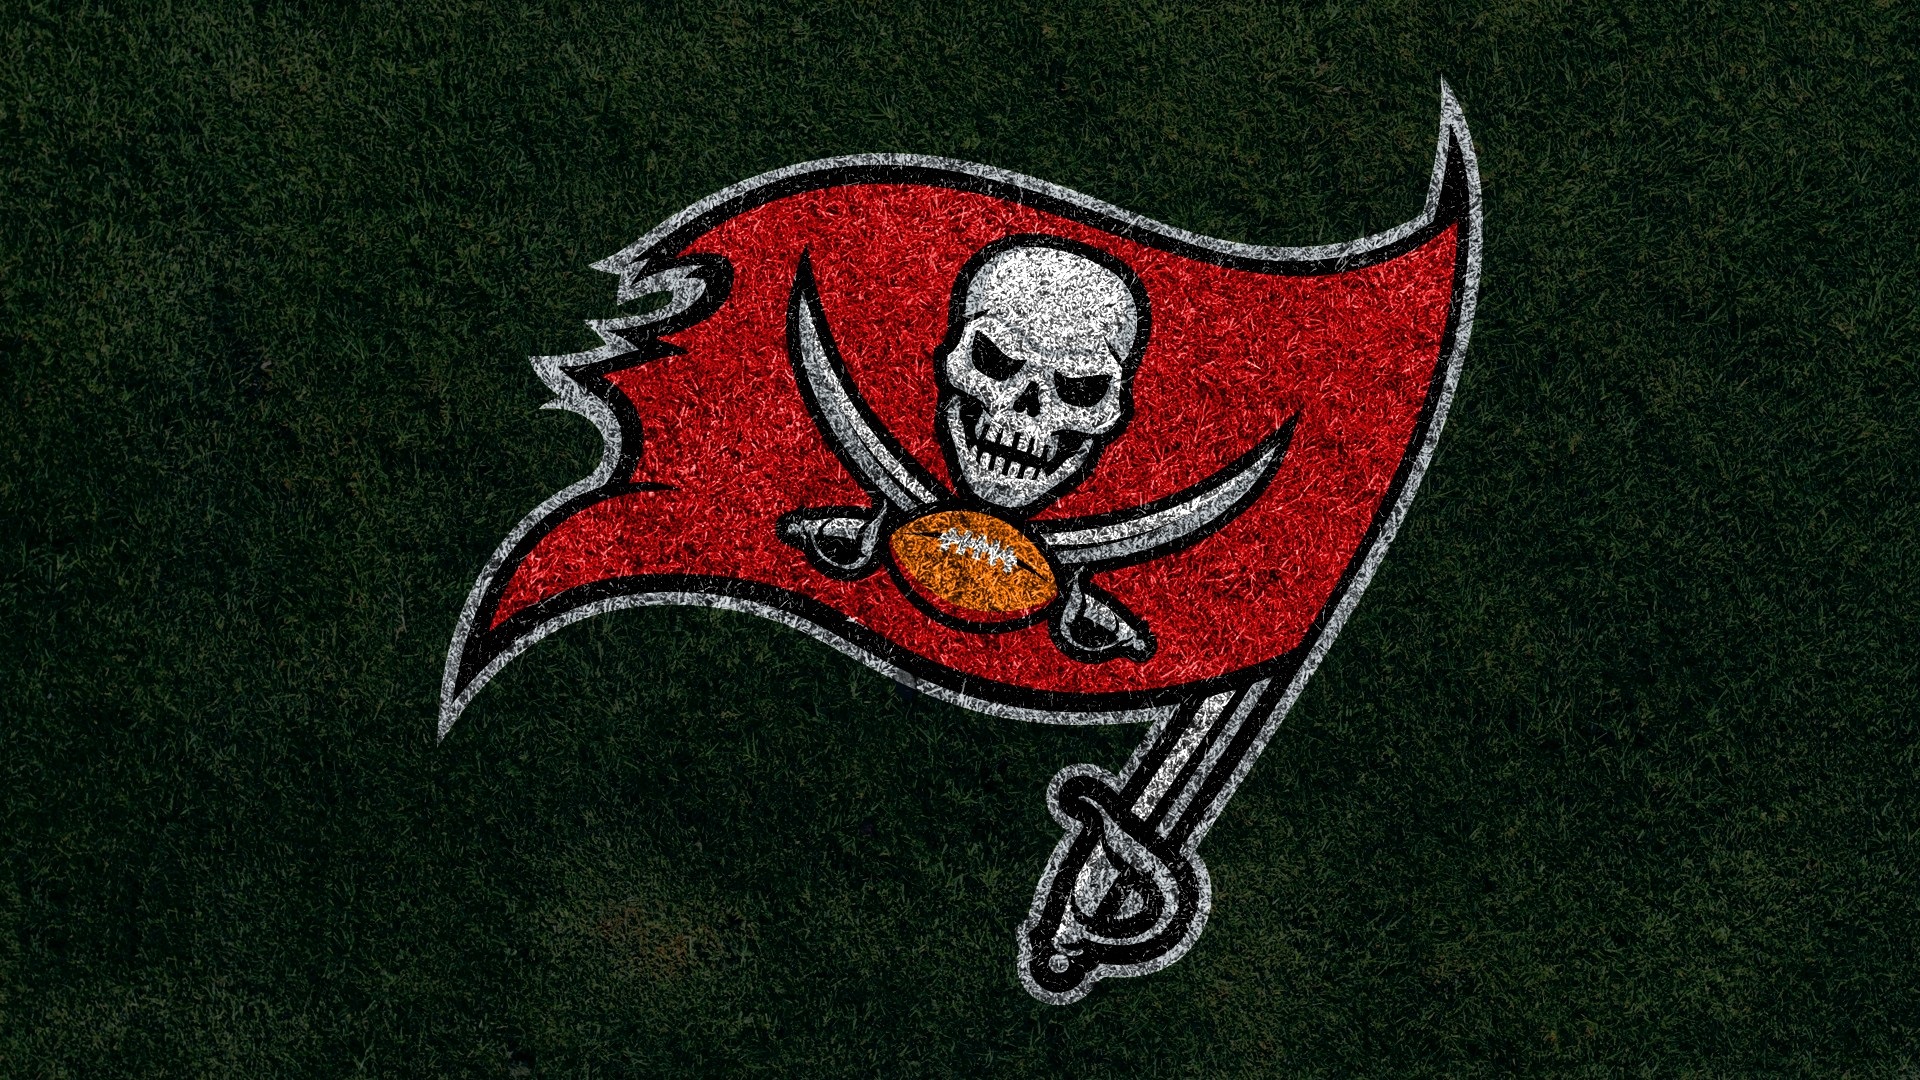 Buccaneers Wallpaper with high-resolution 1920x1080 pixel. You can use this wallpaper for your Mac or Windows Desktop Background, iPhone, Android or Tablet and another Smartphone device